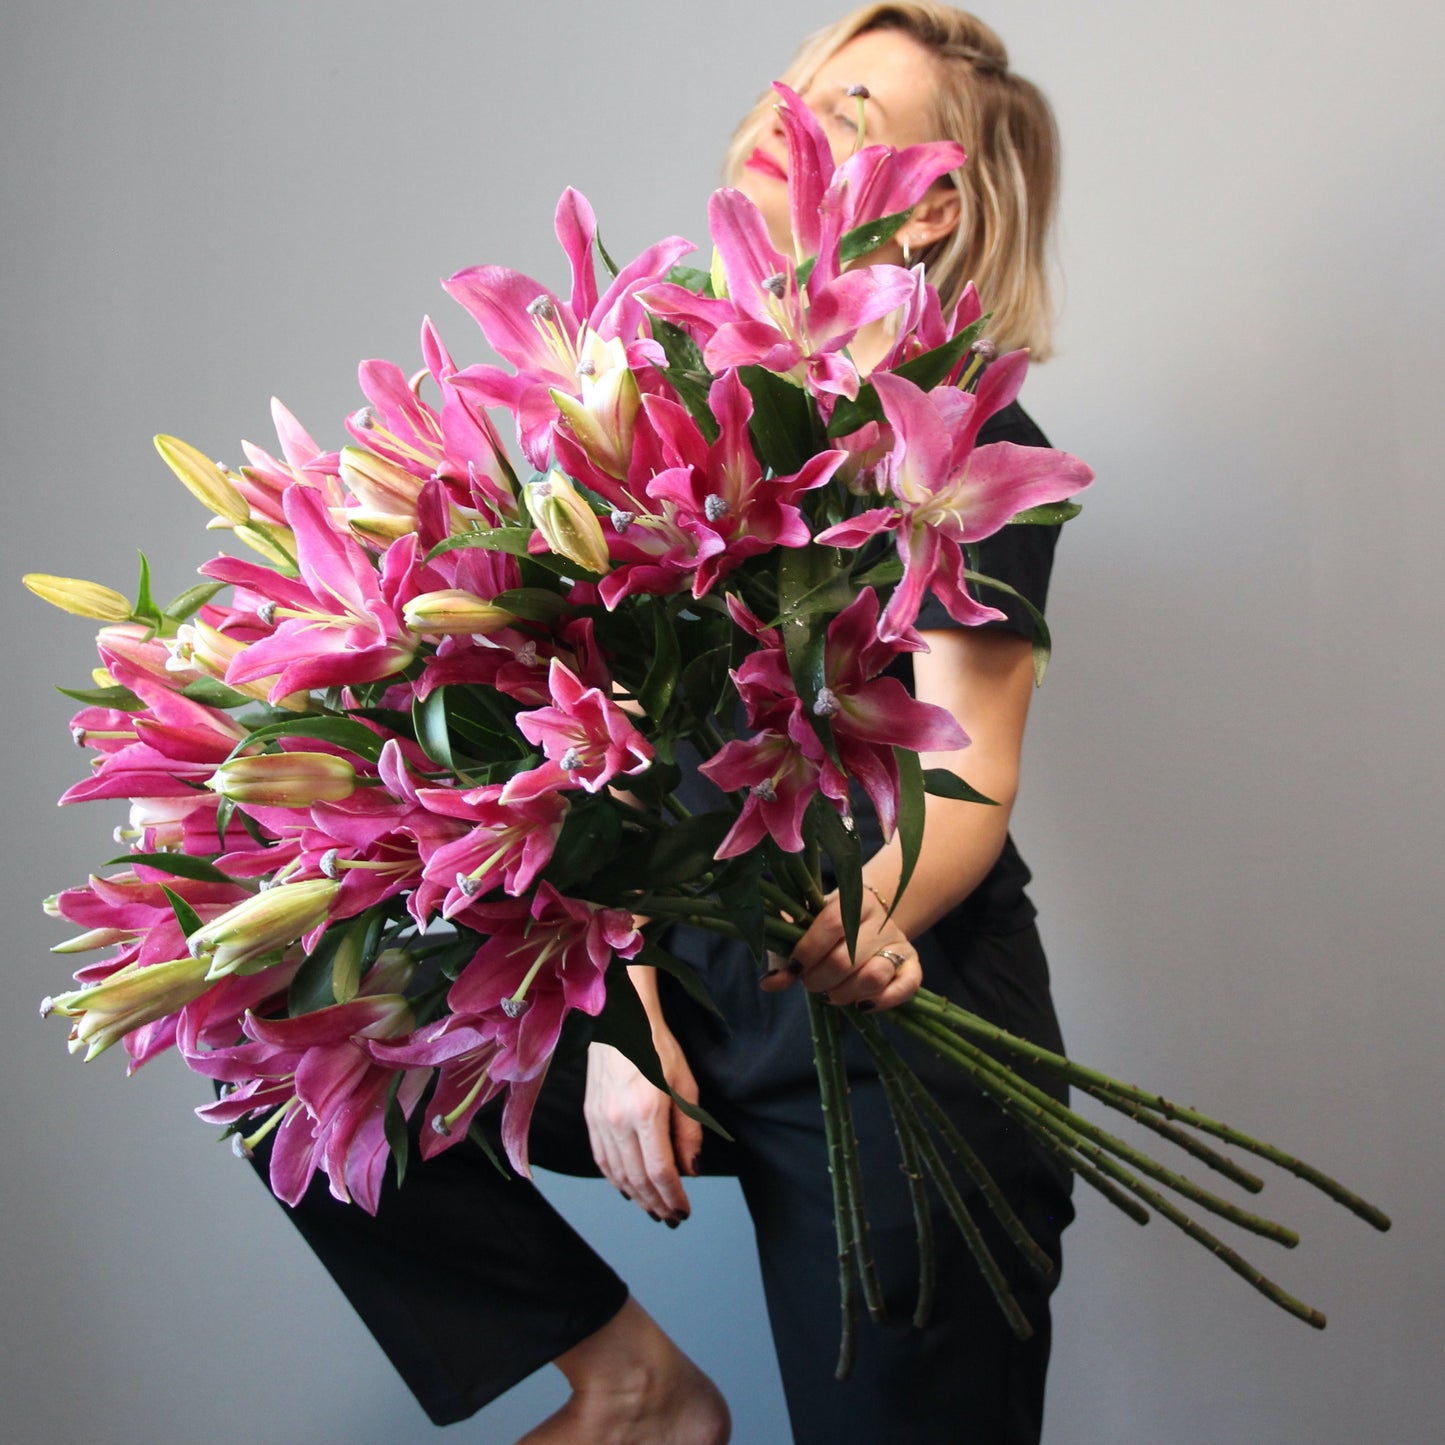 Pink lilias flowers with girl